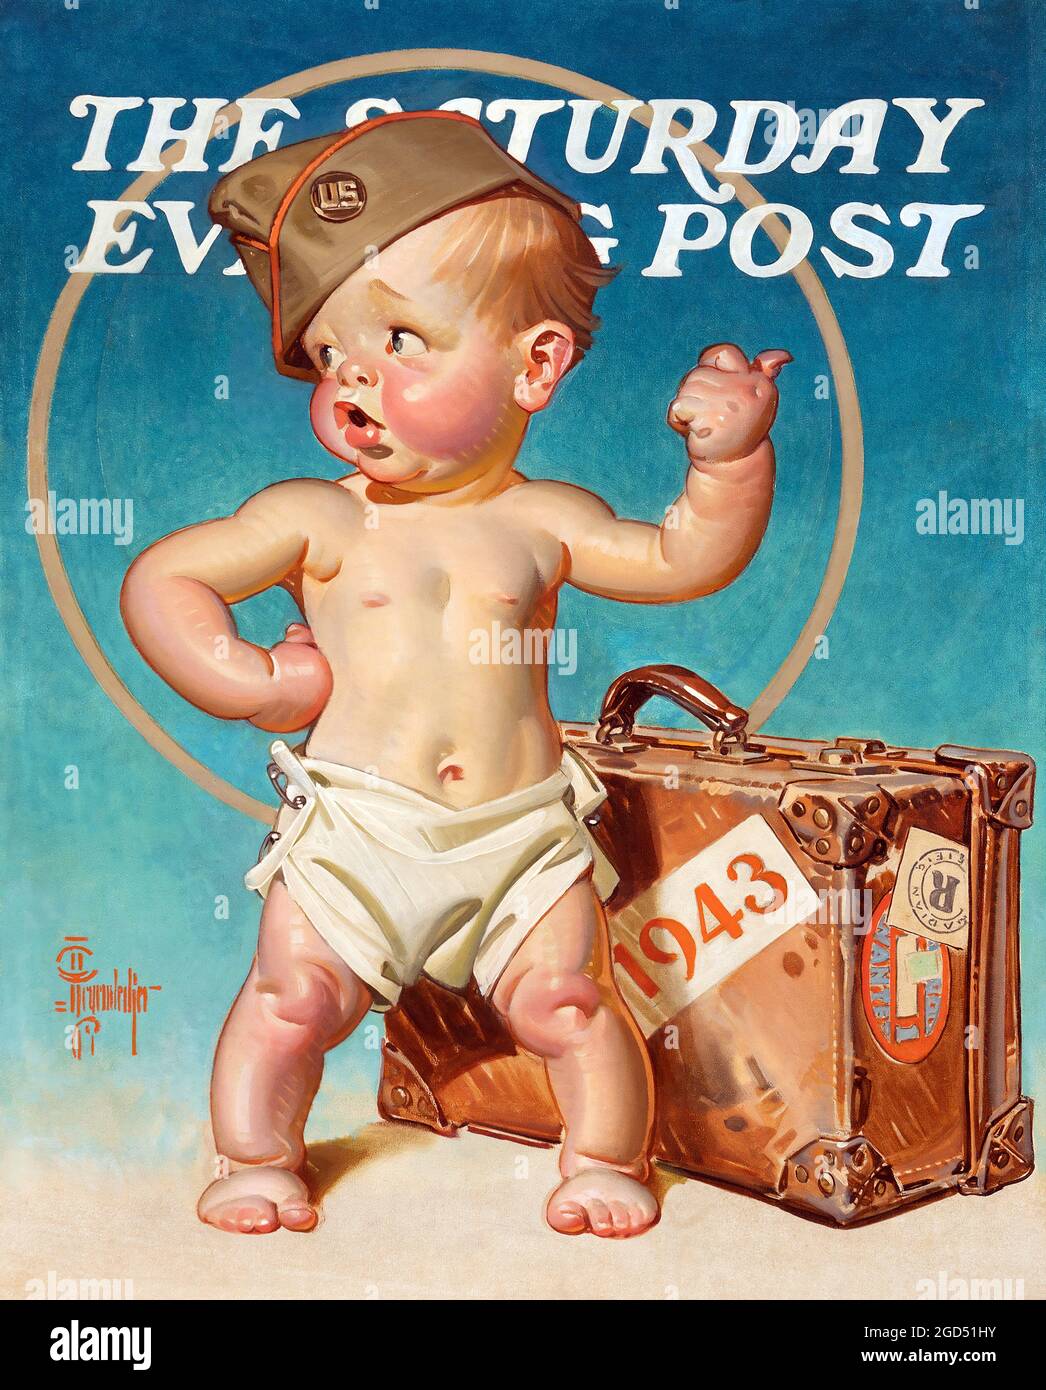 The Saturday Evening Post cover, 1943. Featuring a baby soldier. Joseph Christian Leyendecker illustration that never was released in the magazine. Stock Photo